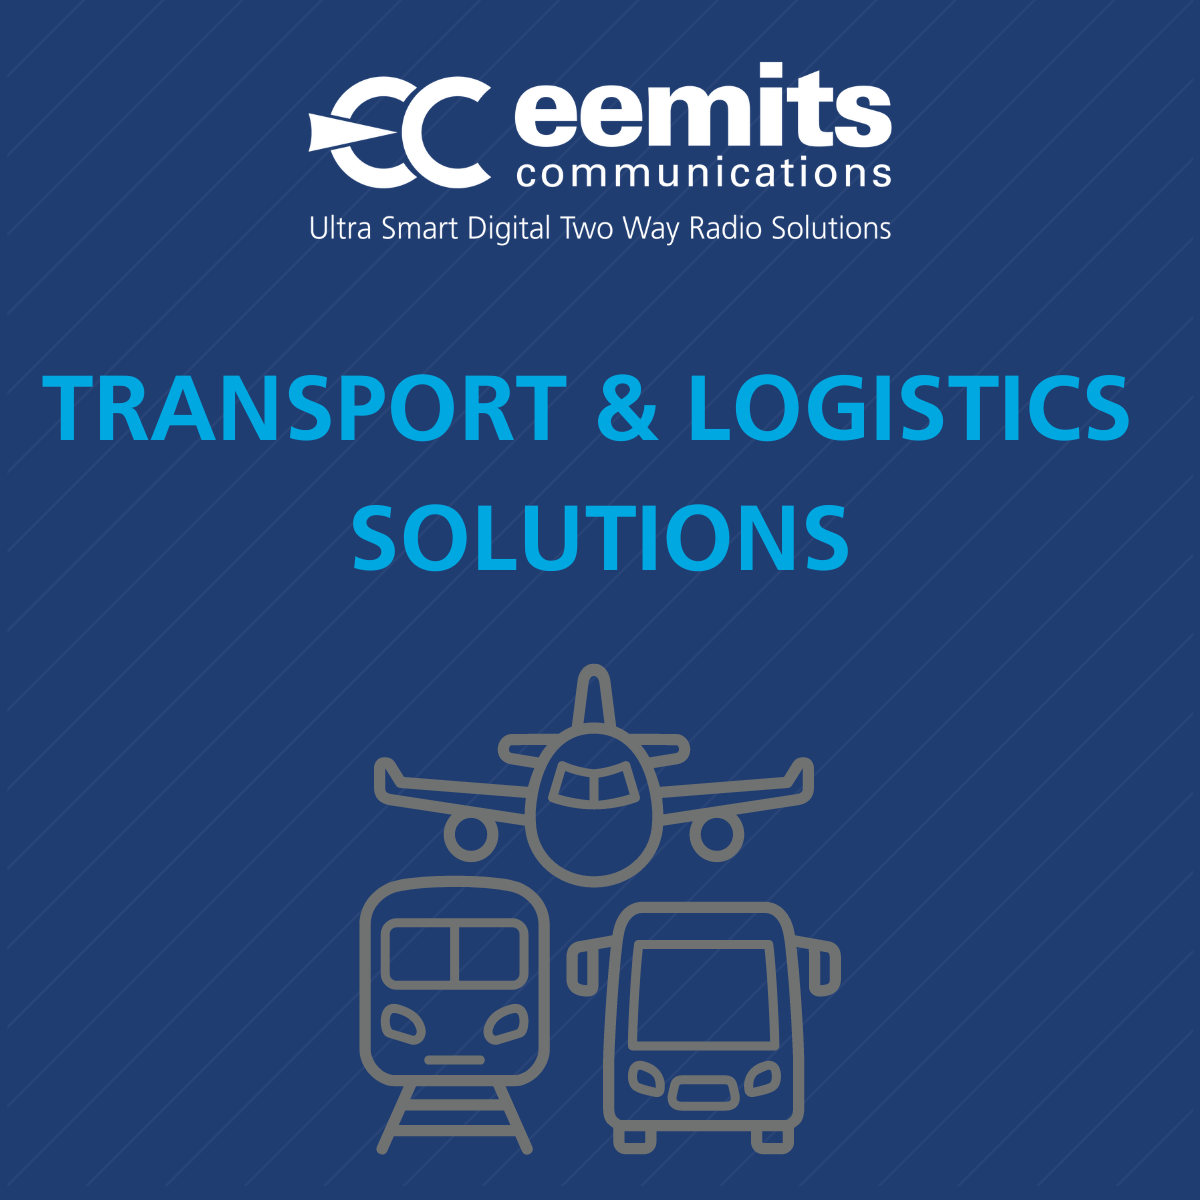 The Best Communication Solutions for Transport & Logistics